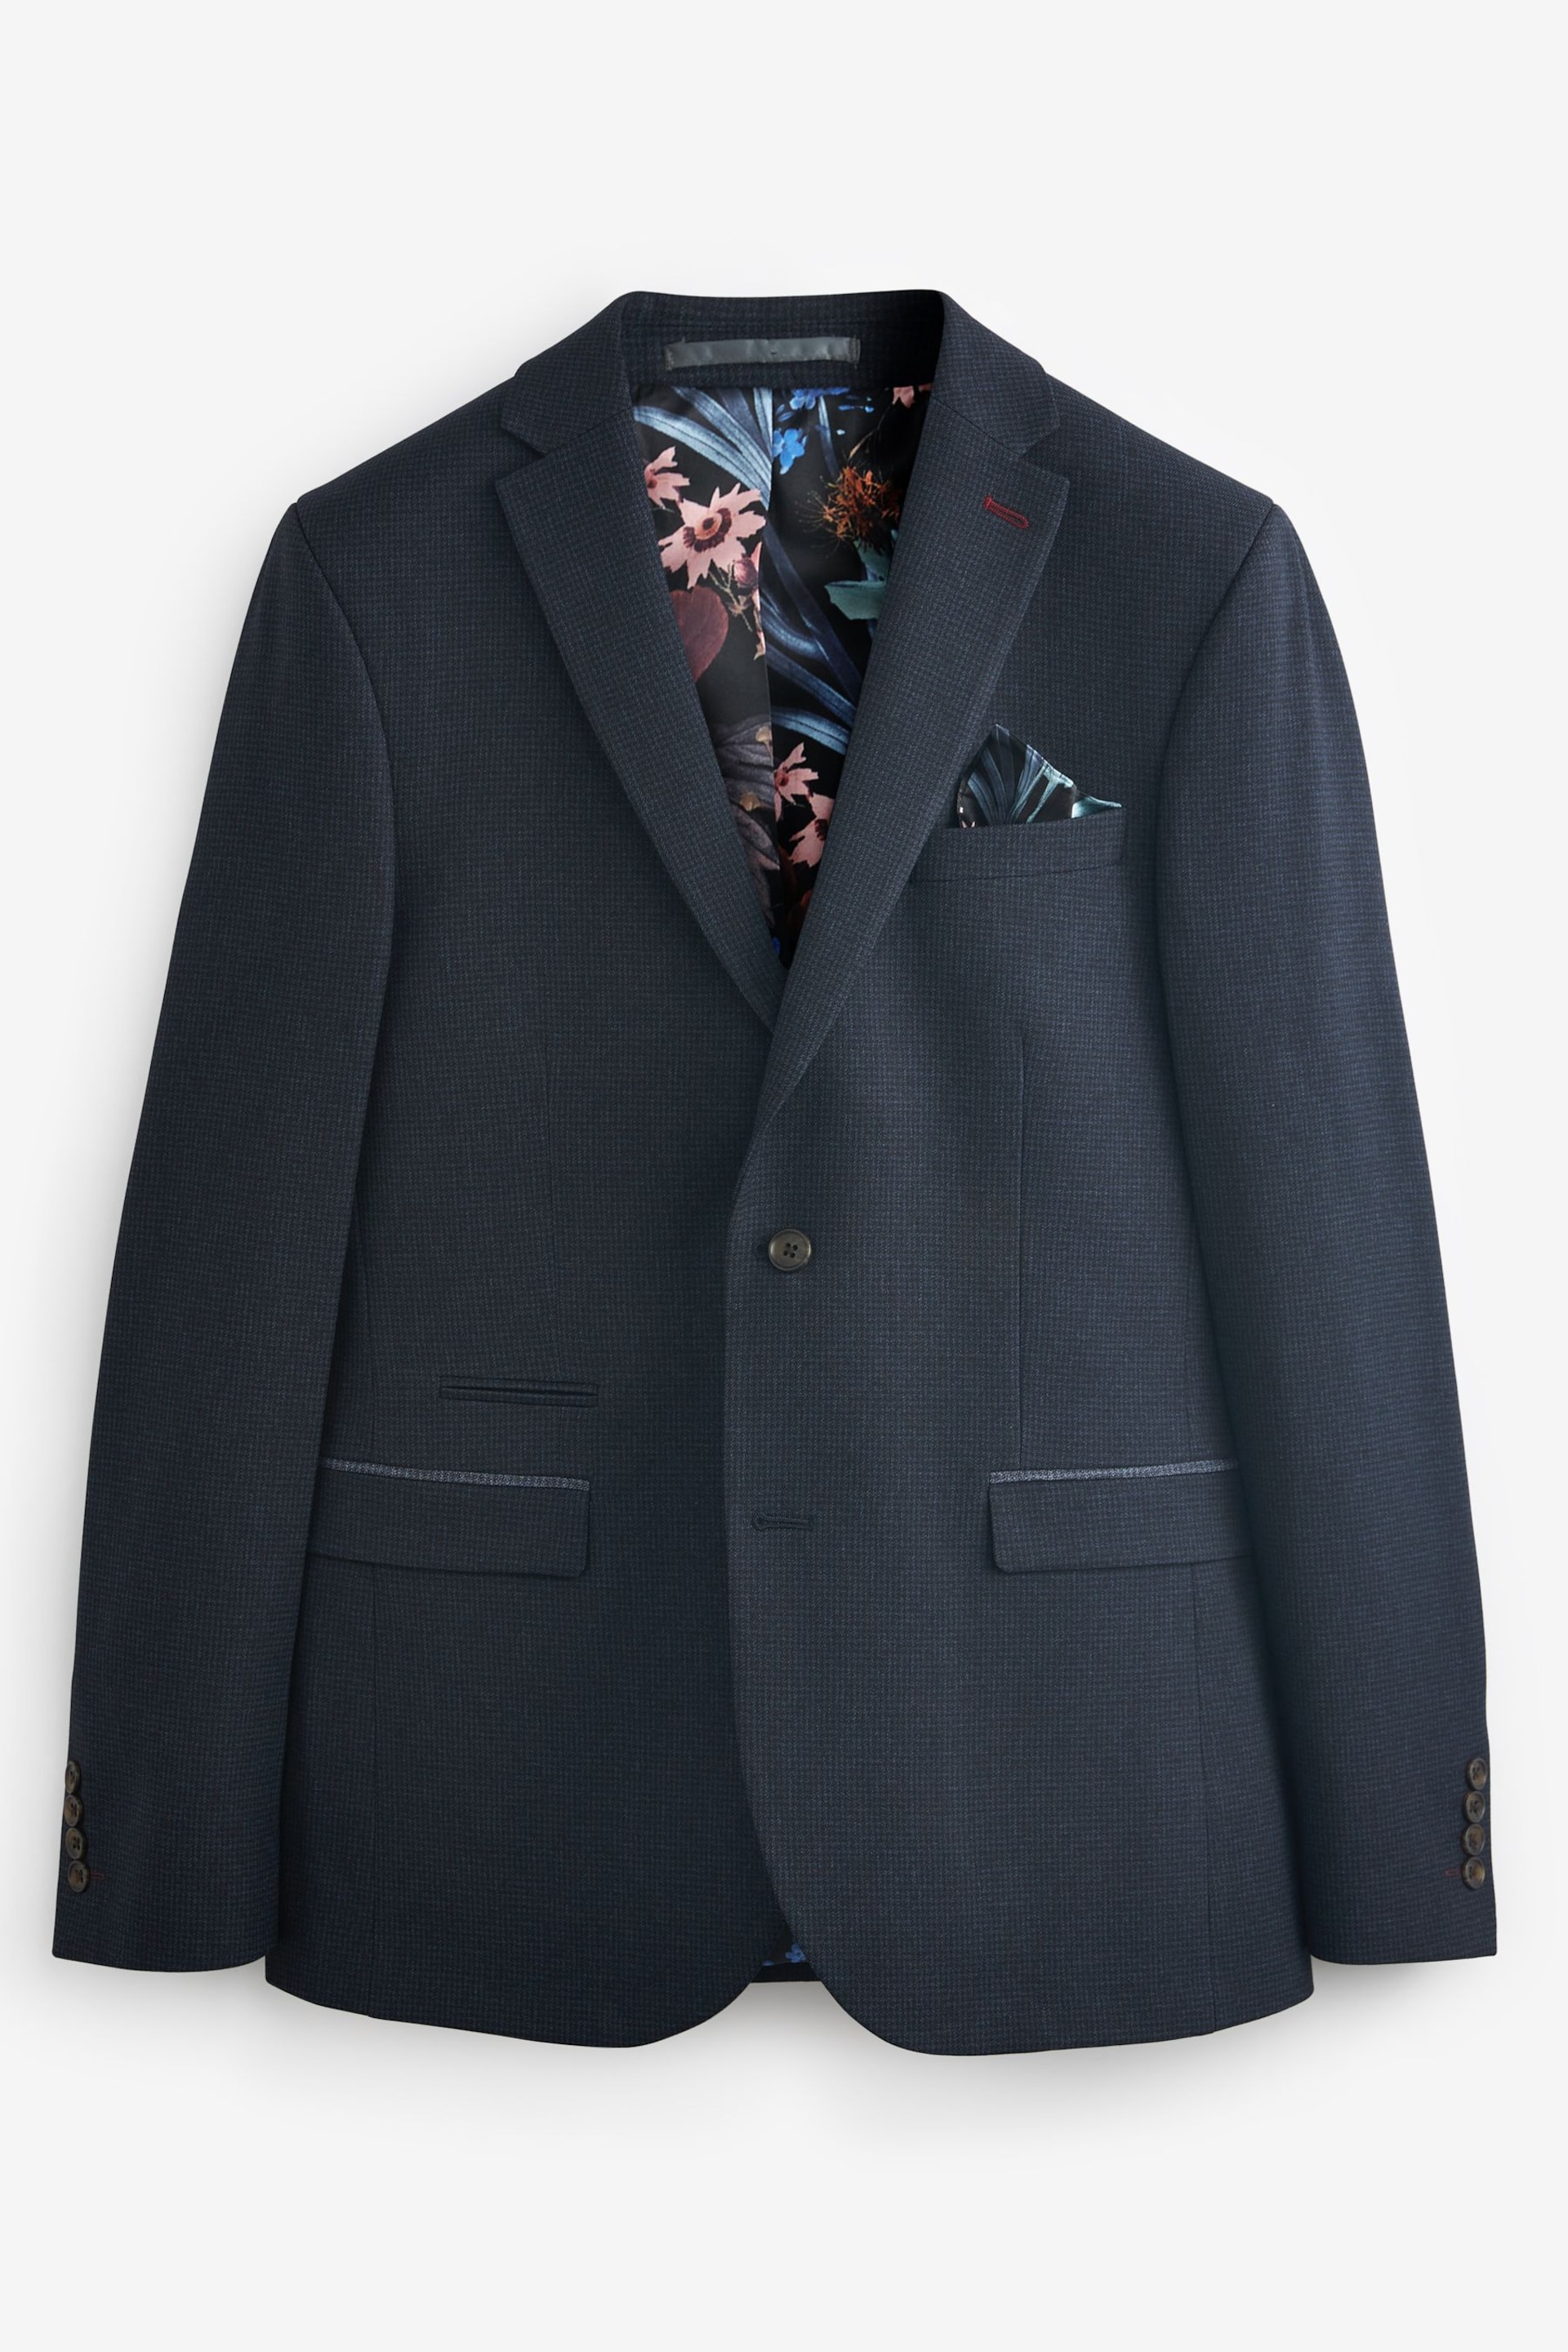 Navy Blue Slim Puppytooth Suit Jacket - Image 8 of 11